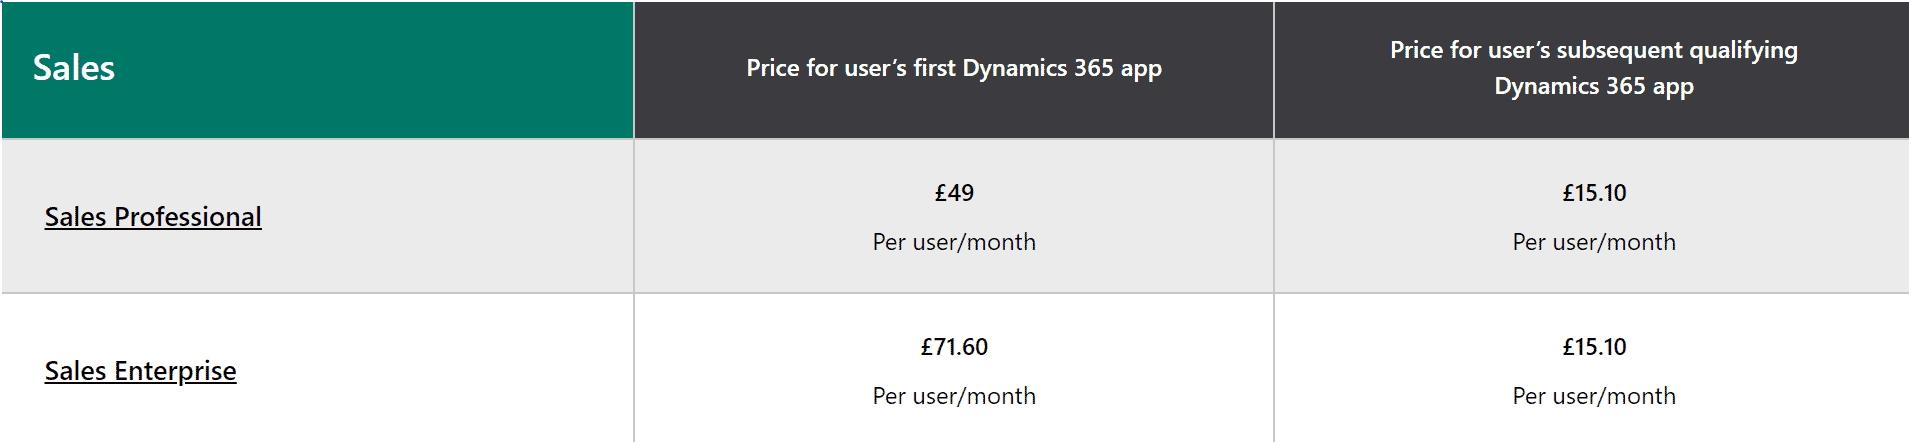 Table of prices per user per month of Dynamics 365 licences for sales